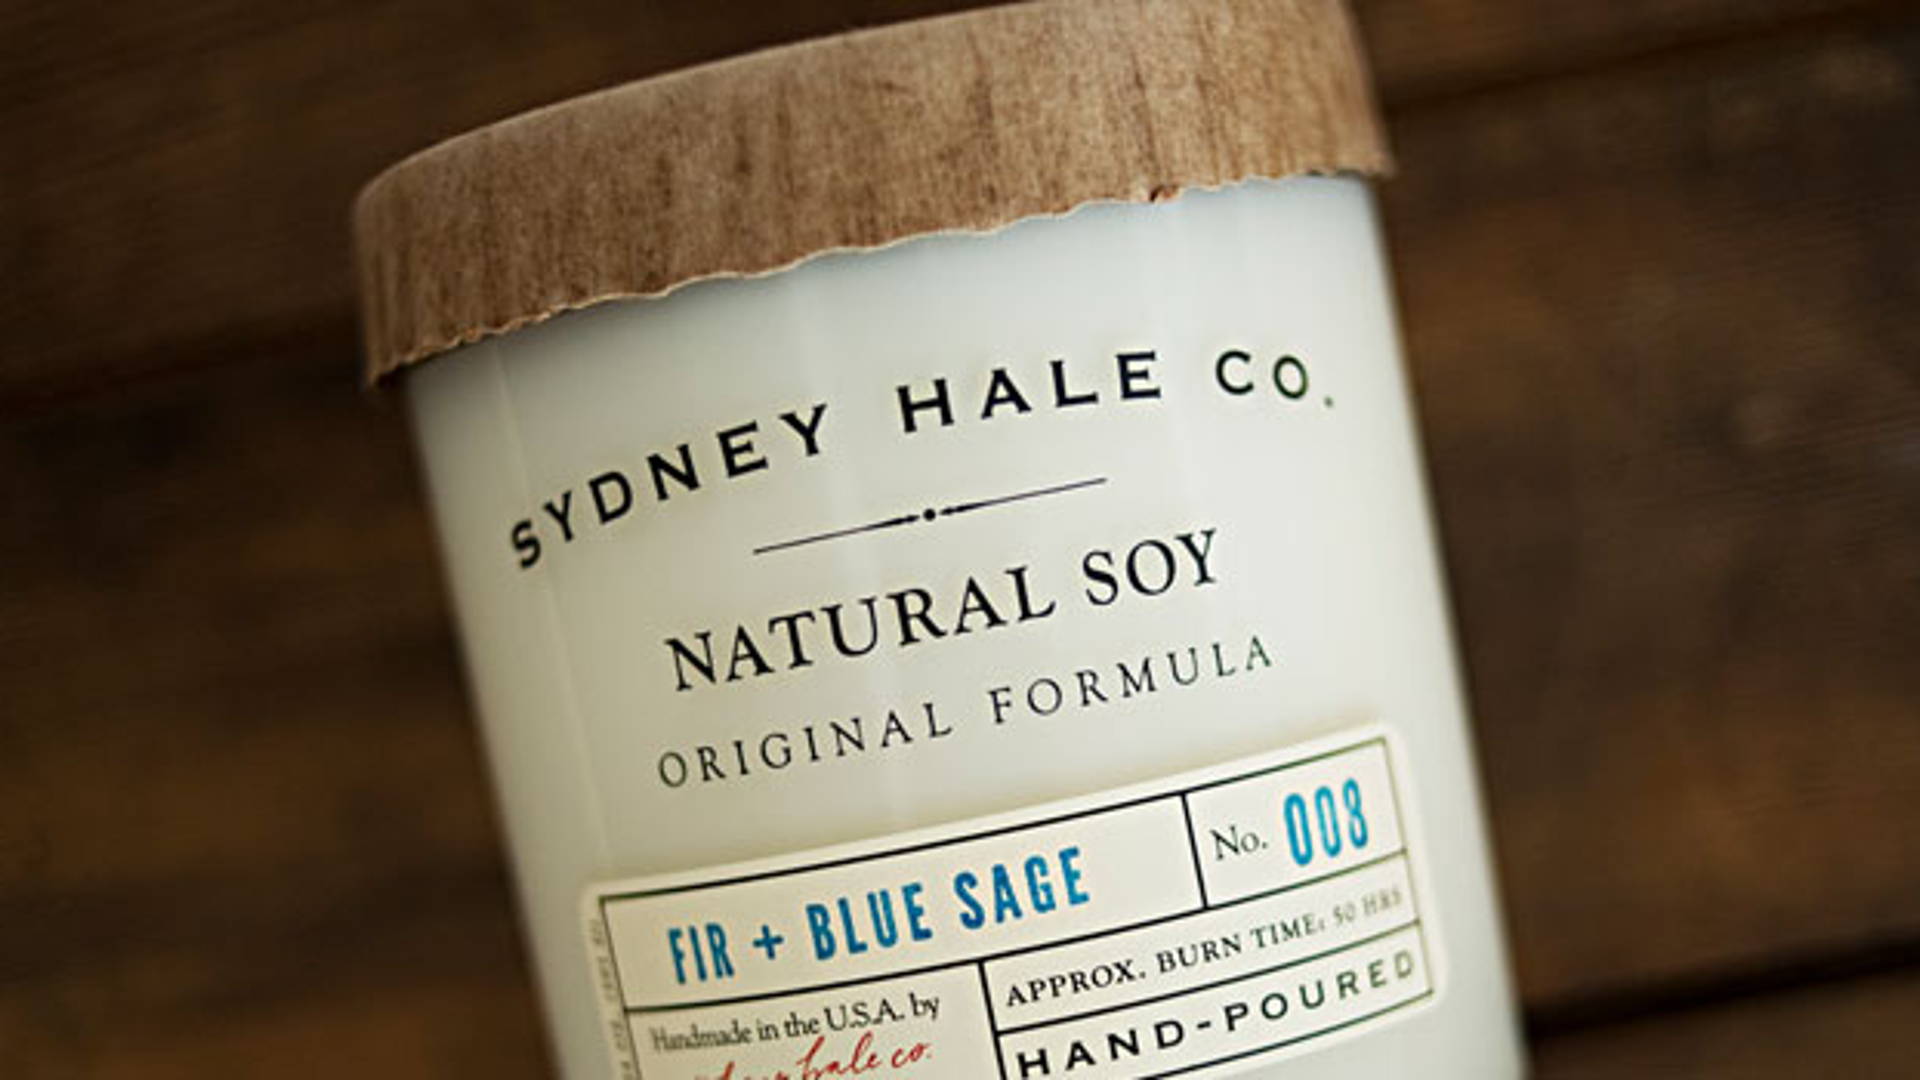 Featured image for Sydney Hale Co.